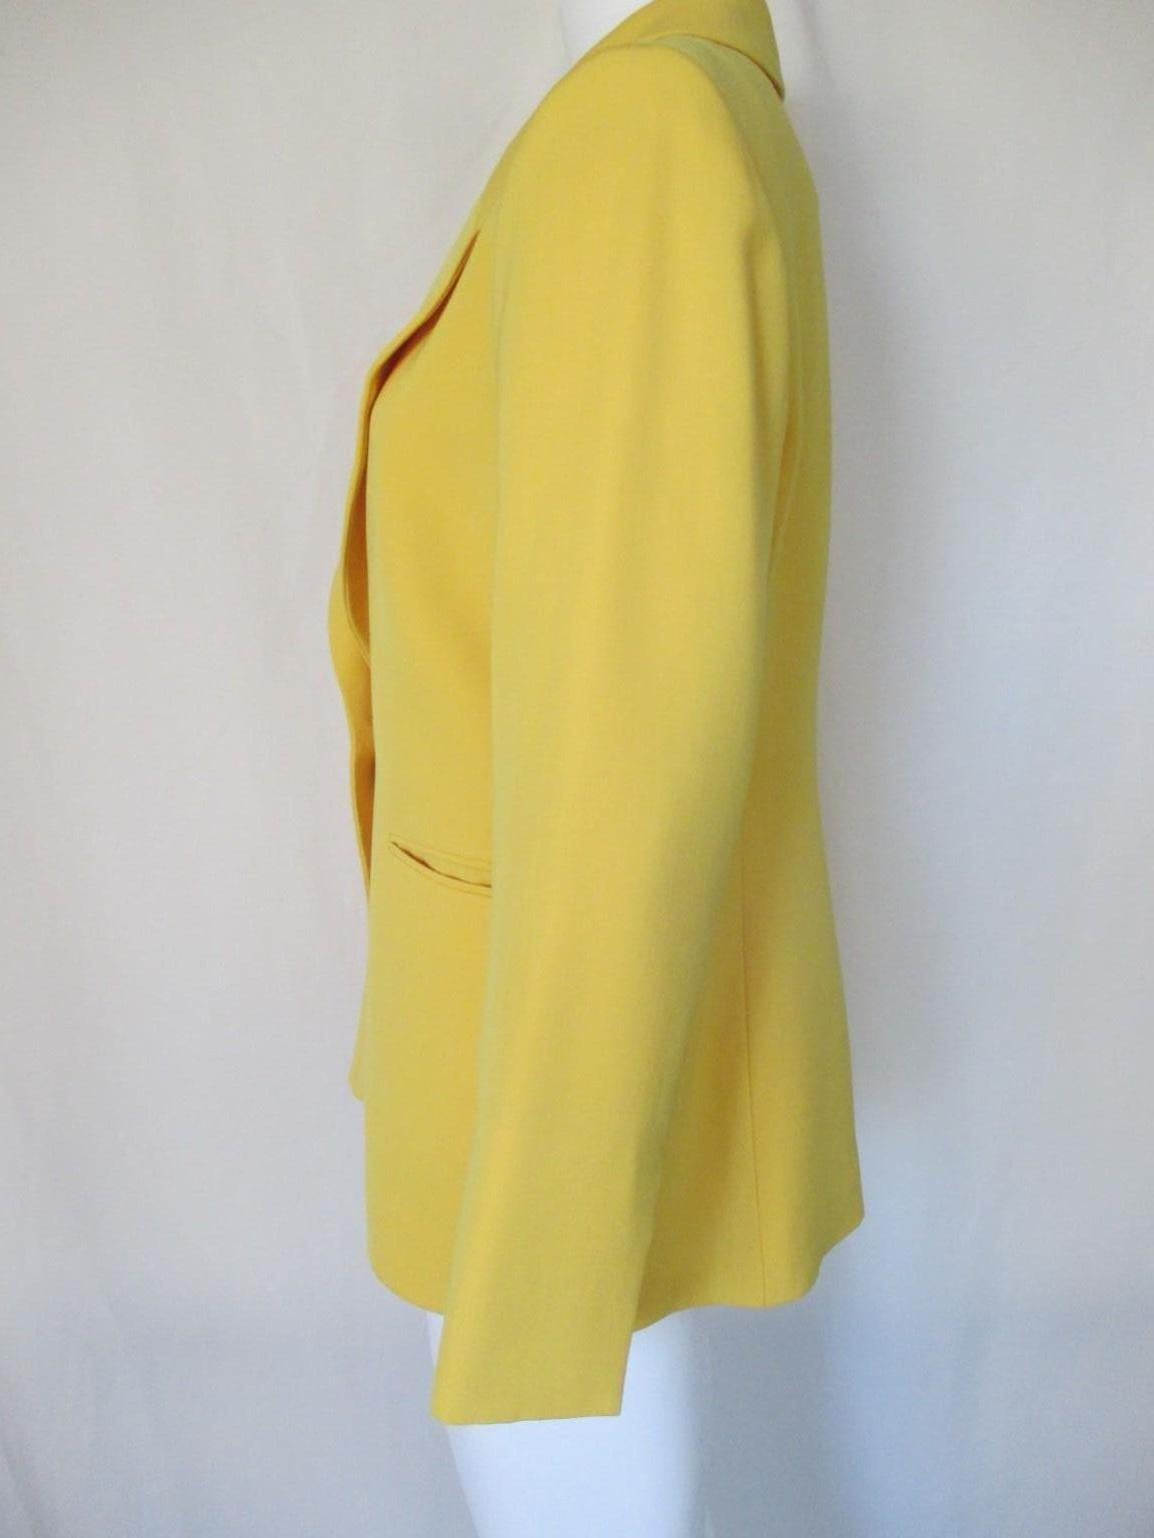 Vintage Christian Dior Boutique jacket with 1 gold color button.
2 pockets
Material: 60% wool / 40% polyester
Color: Yellow
Size is marked  EU France 44 / Germany 42 , medium see section measurements.
This item is professionaly dry-cleaned.
Please